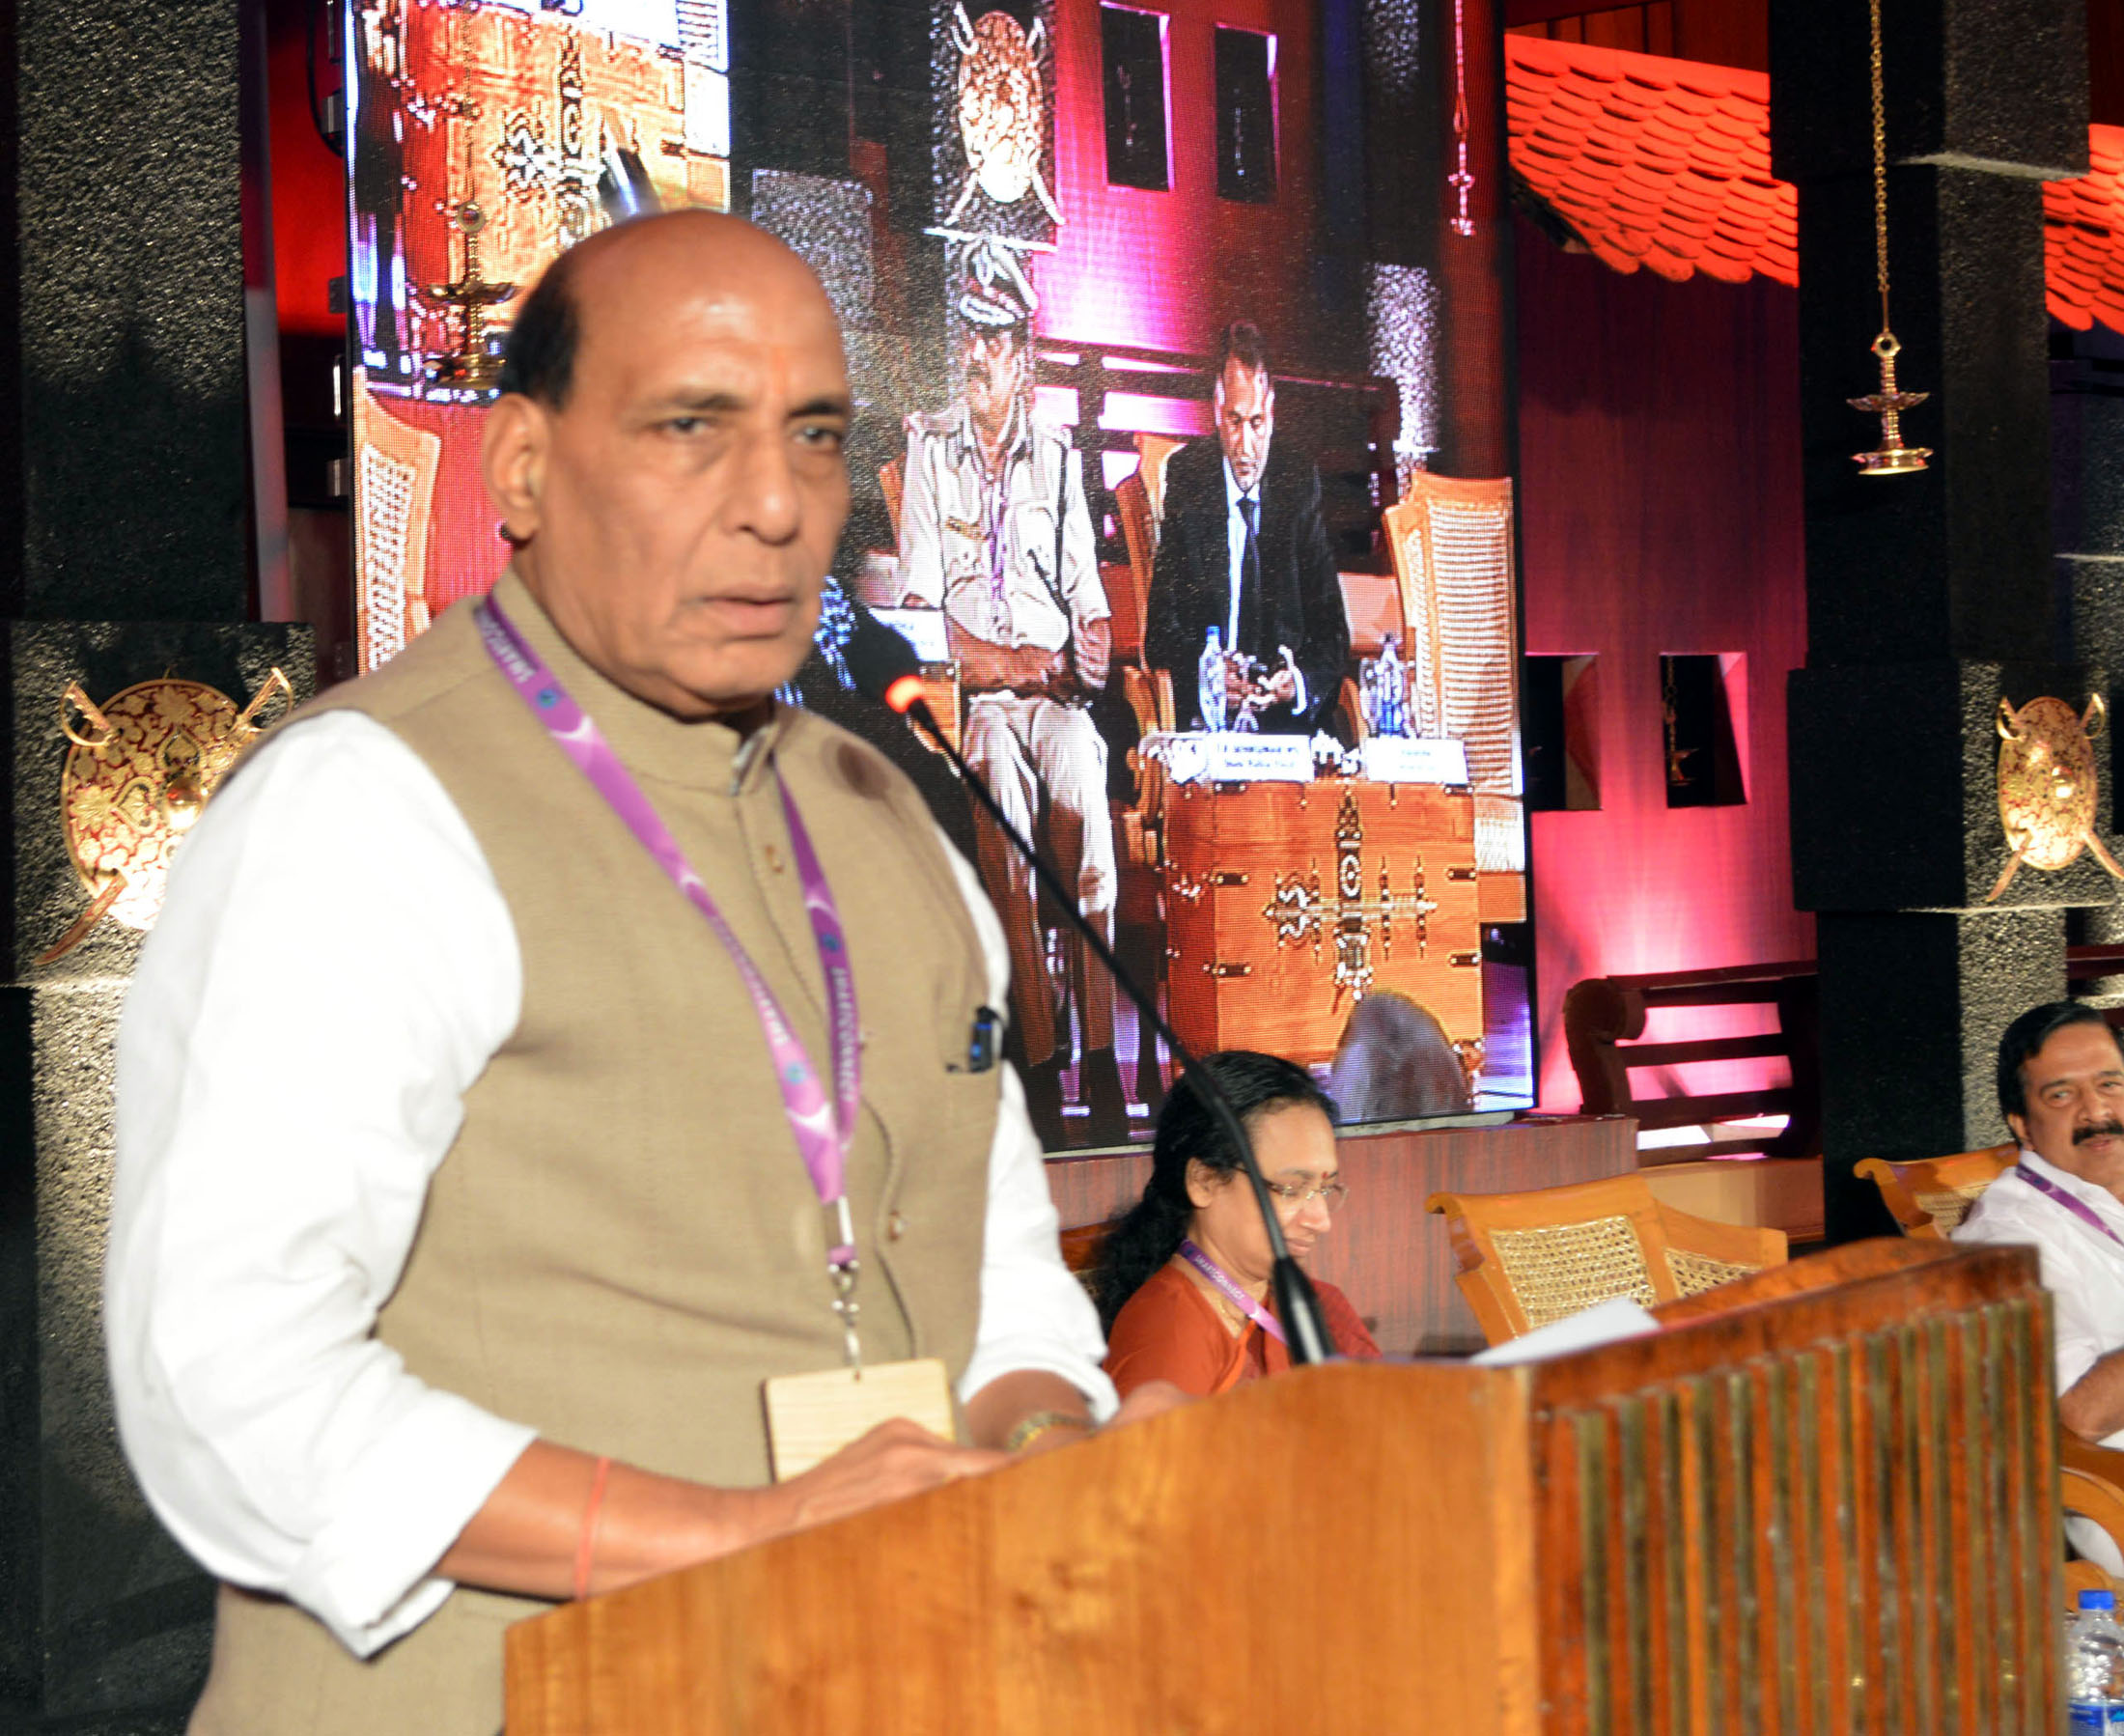 The Union Home Minister, Shri Rajnath Singh addressing the National Conclave on Community Policing, at Kovalam, in Thiruvananthapuram, Kerala on January 27, 2016.  	The Kerala Home Minister, Shri Ramesh Chennithala and the State Home Secretary, Smt. Nalini Netto are also seen.